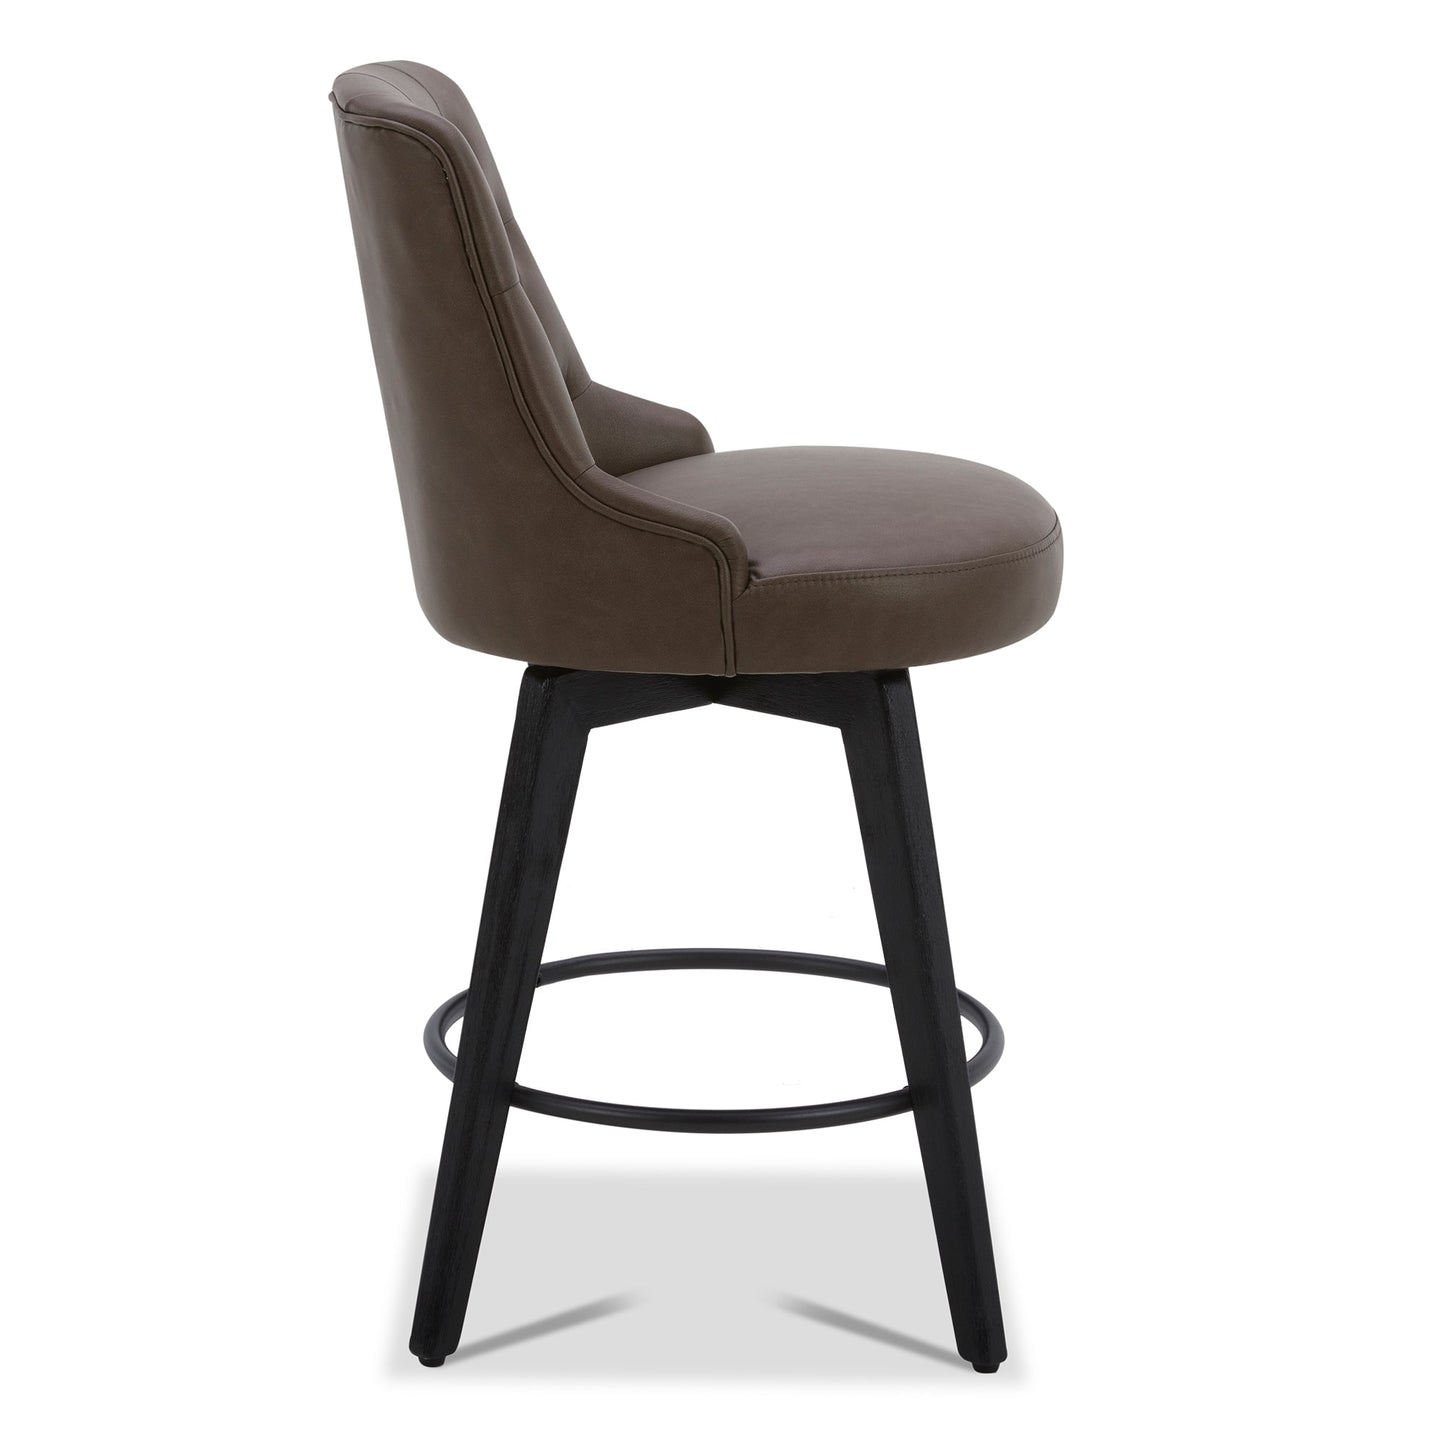 CHITA LIVING-Morgan Prime Tufted Swivel Counter Stool-Counter Stools-Faux Leather-Chocolate-Individual